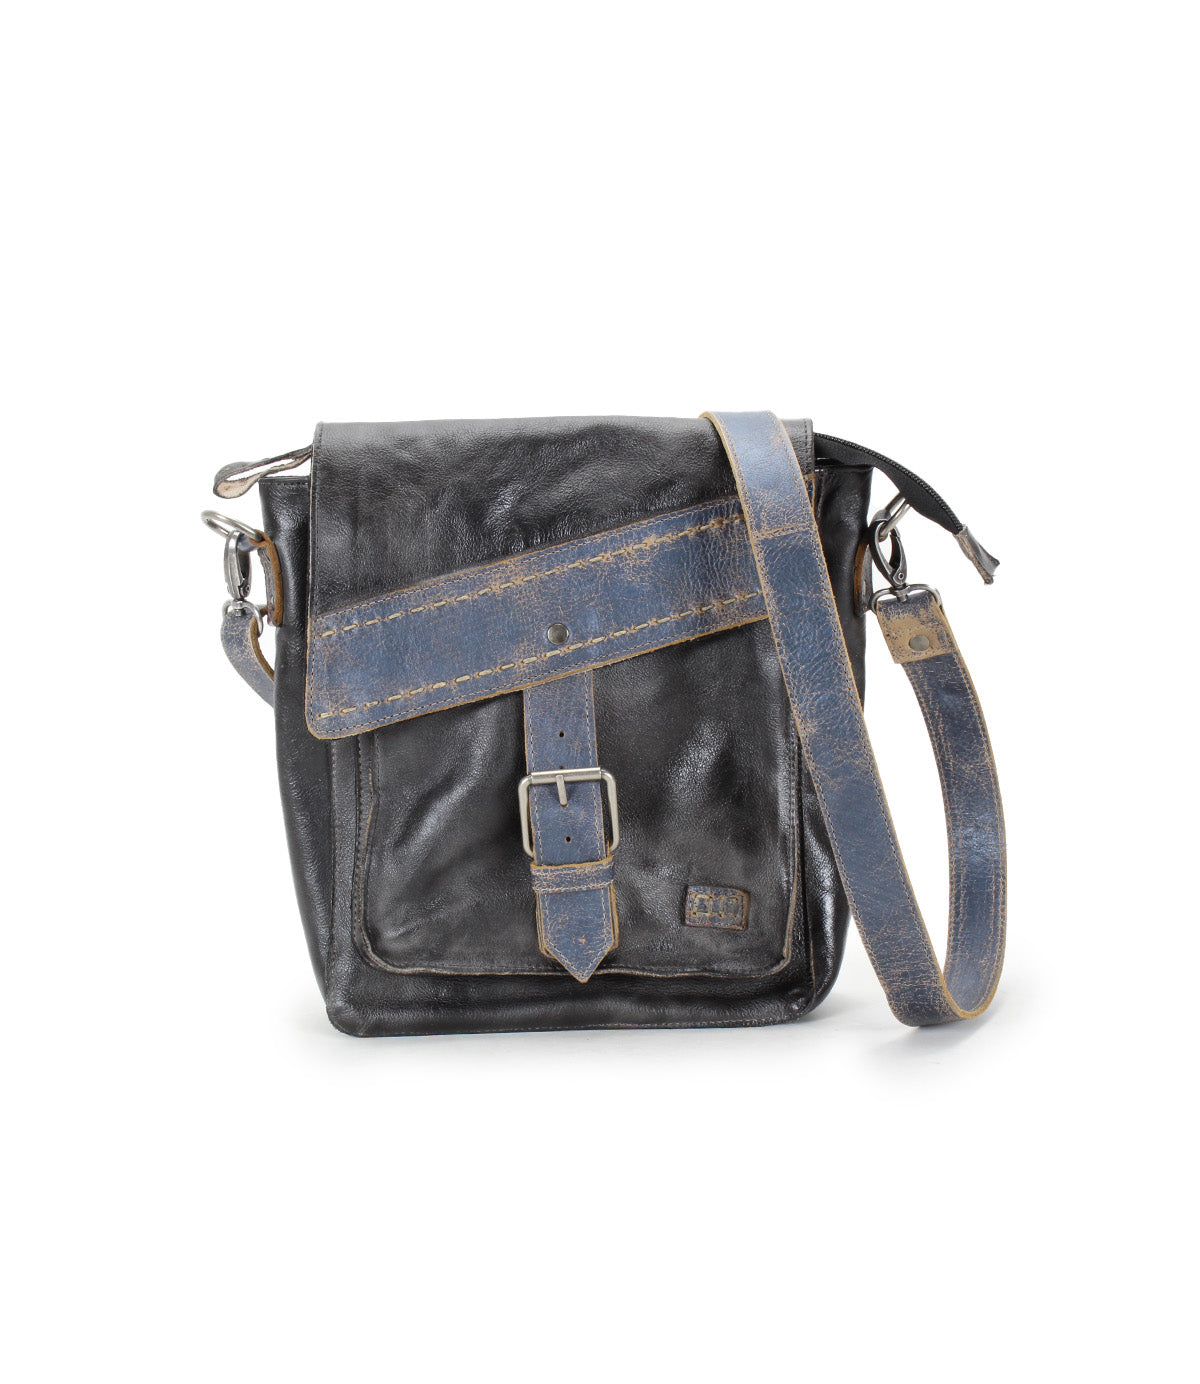 A black and blue Ainhoa crossbody messenger bag by Bed Stu with adjustable strap.